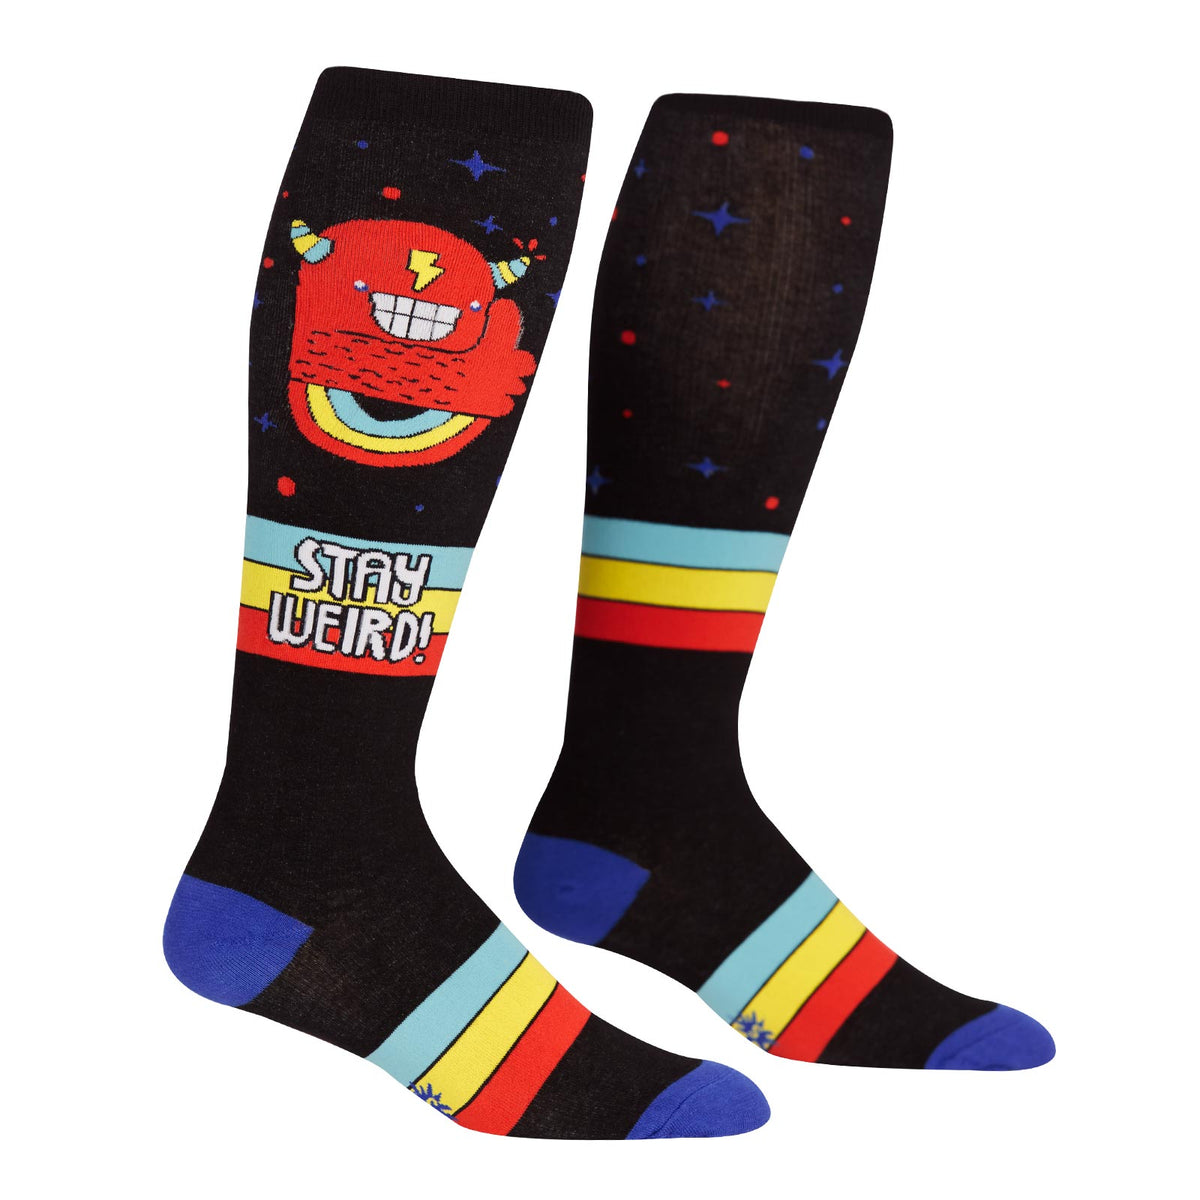 Extra-stretchy STAY WEIRD knee-high socks with monsters for wide calves